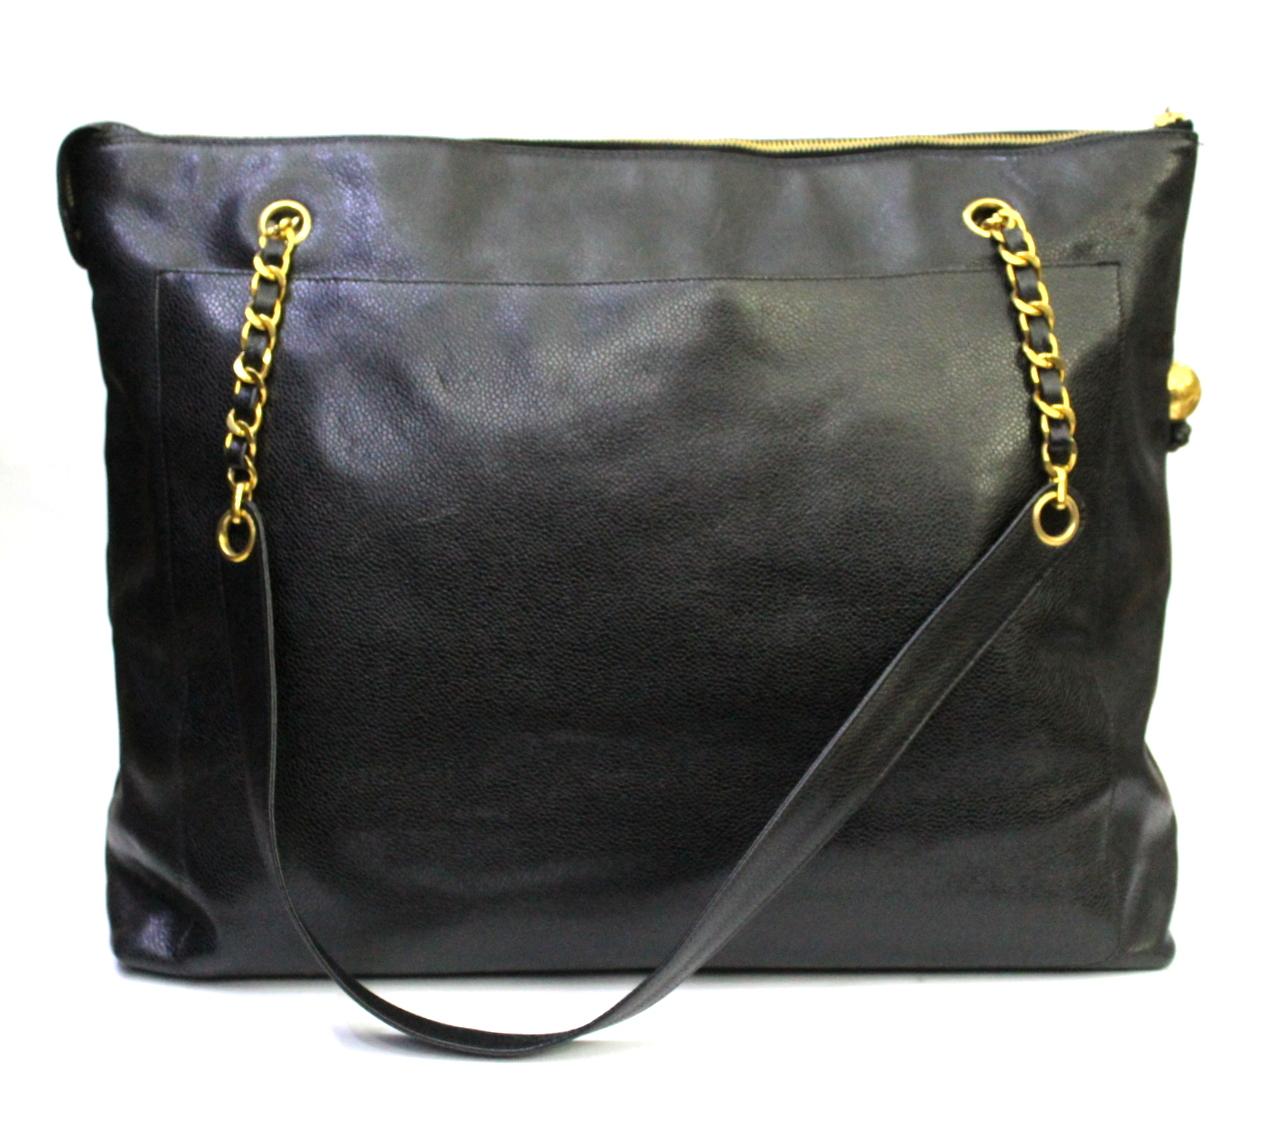 Chanel Vintage 90s in black lambskin, with golden hardware.
Zipper closure, inside very large.
Double chain handle for comfortable wearing on the shoulder.
Enriched on the front side by a pocket with the CC logo.
The bag is in excellent condition,